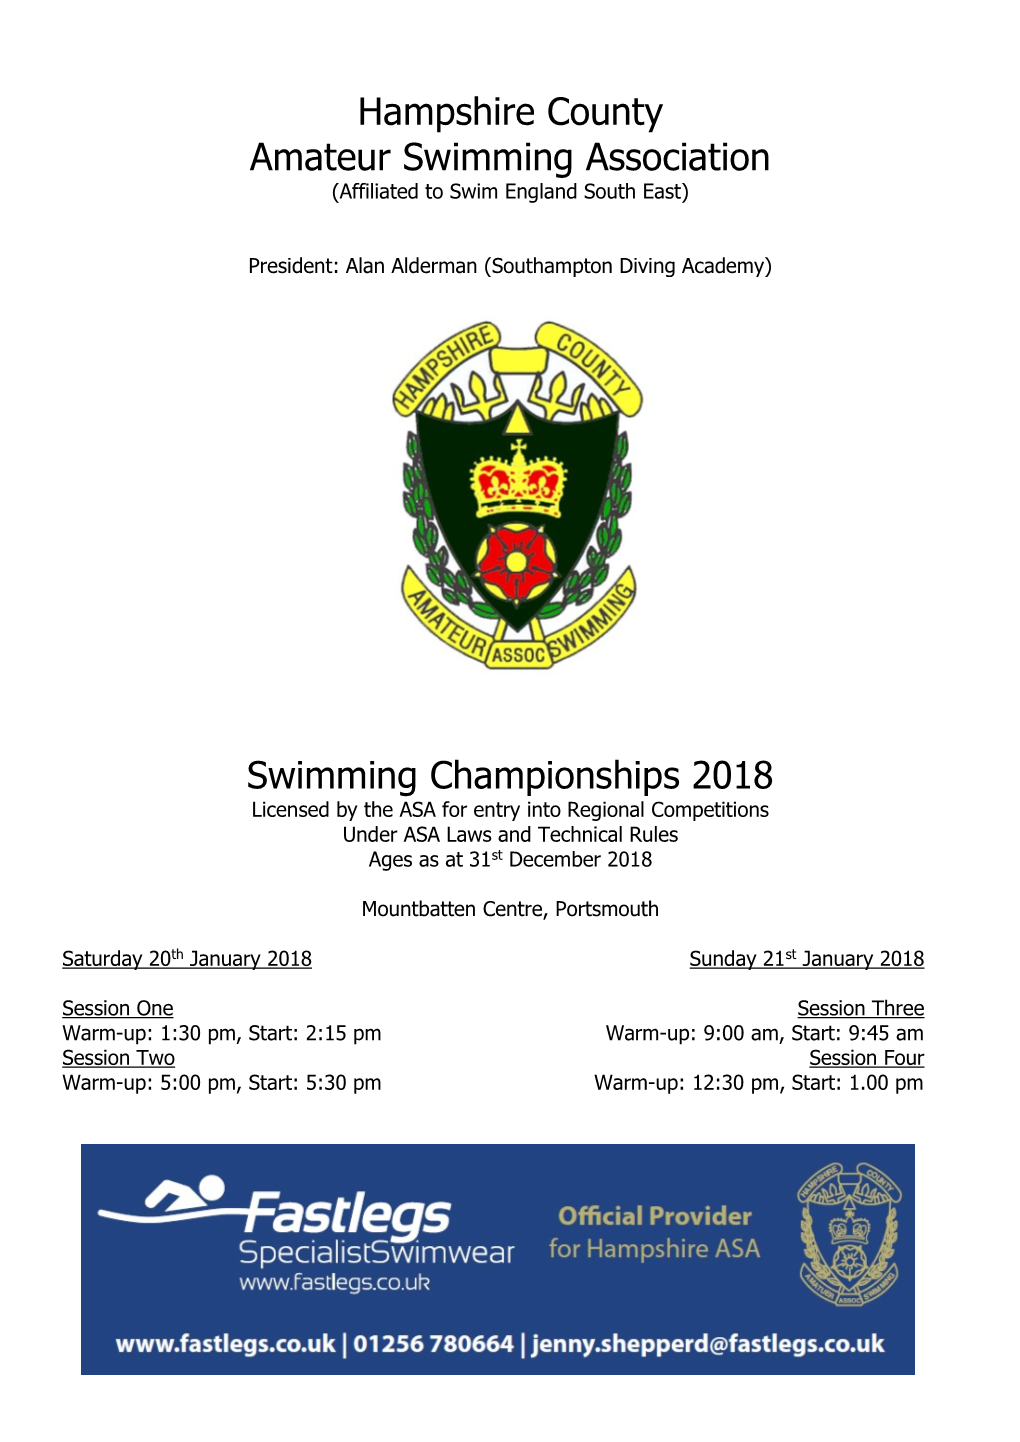 Hampshire County Amateur Swimming Association Swimming